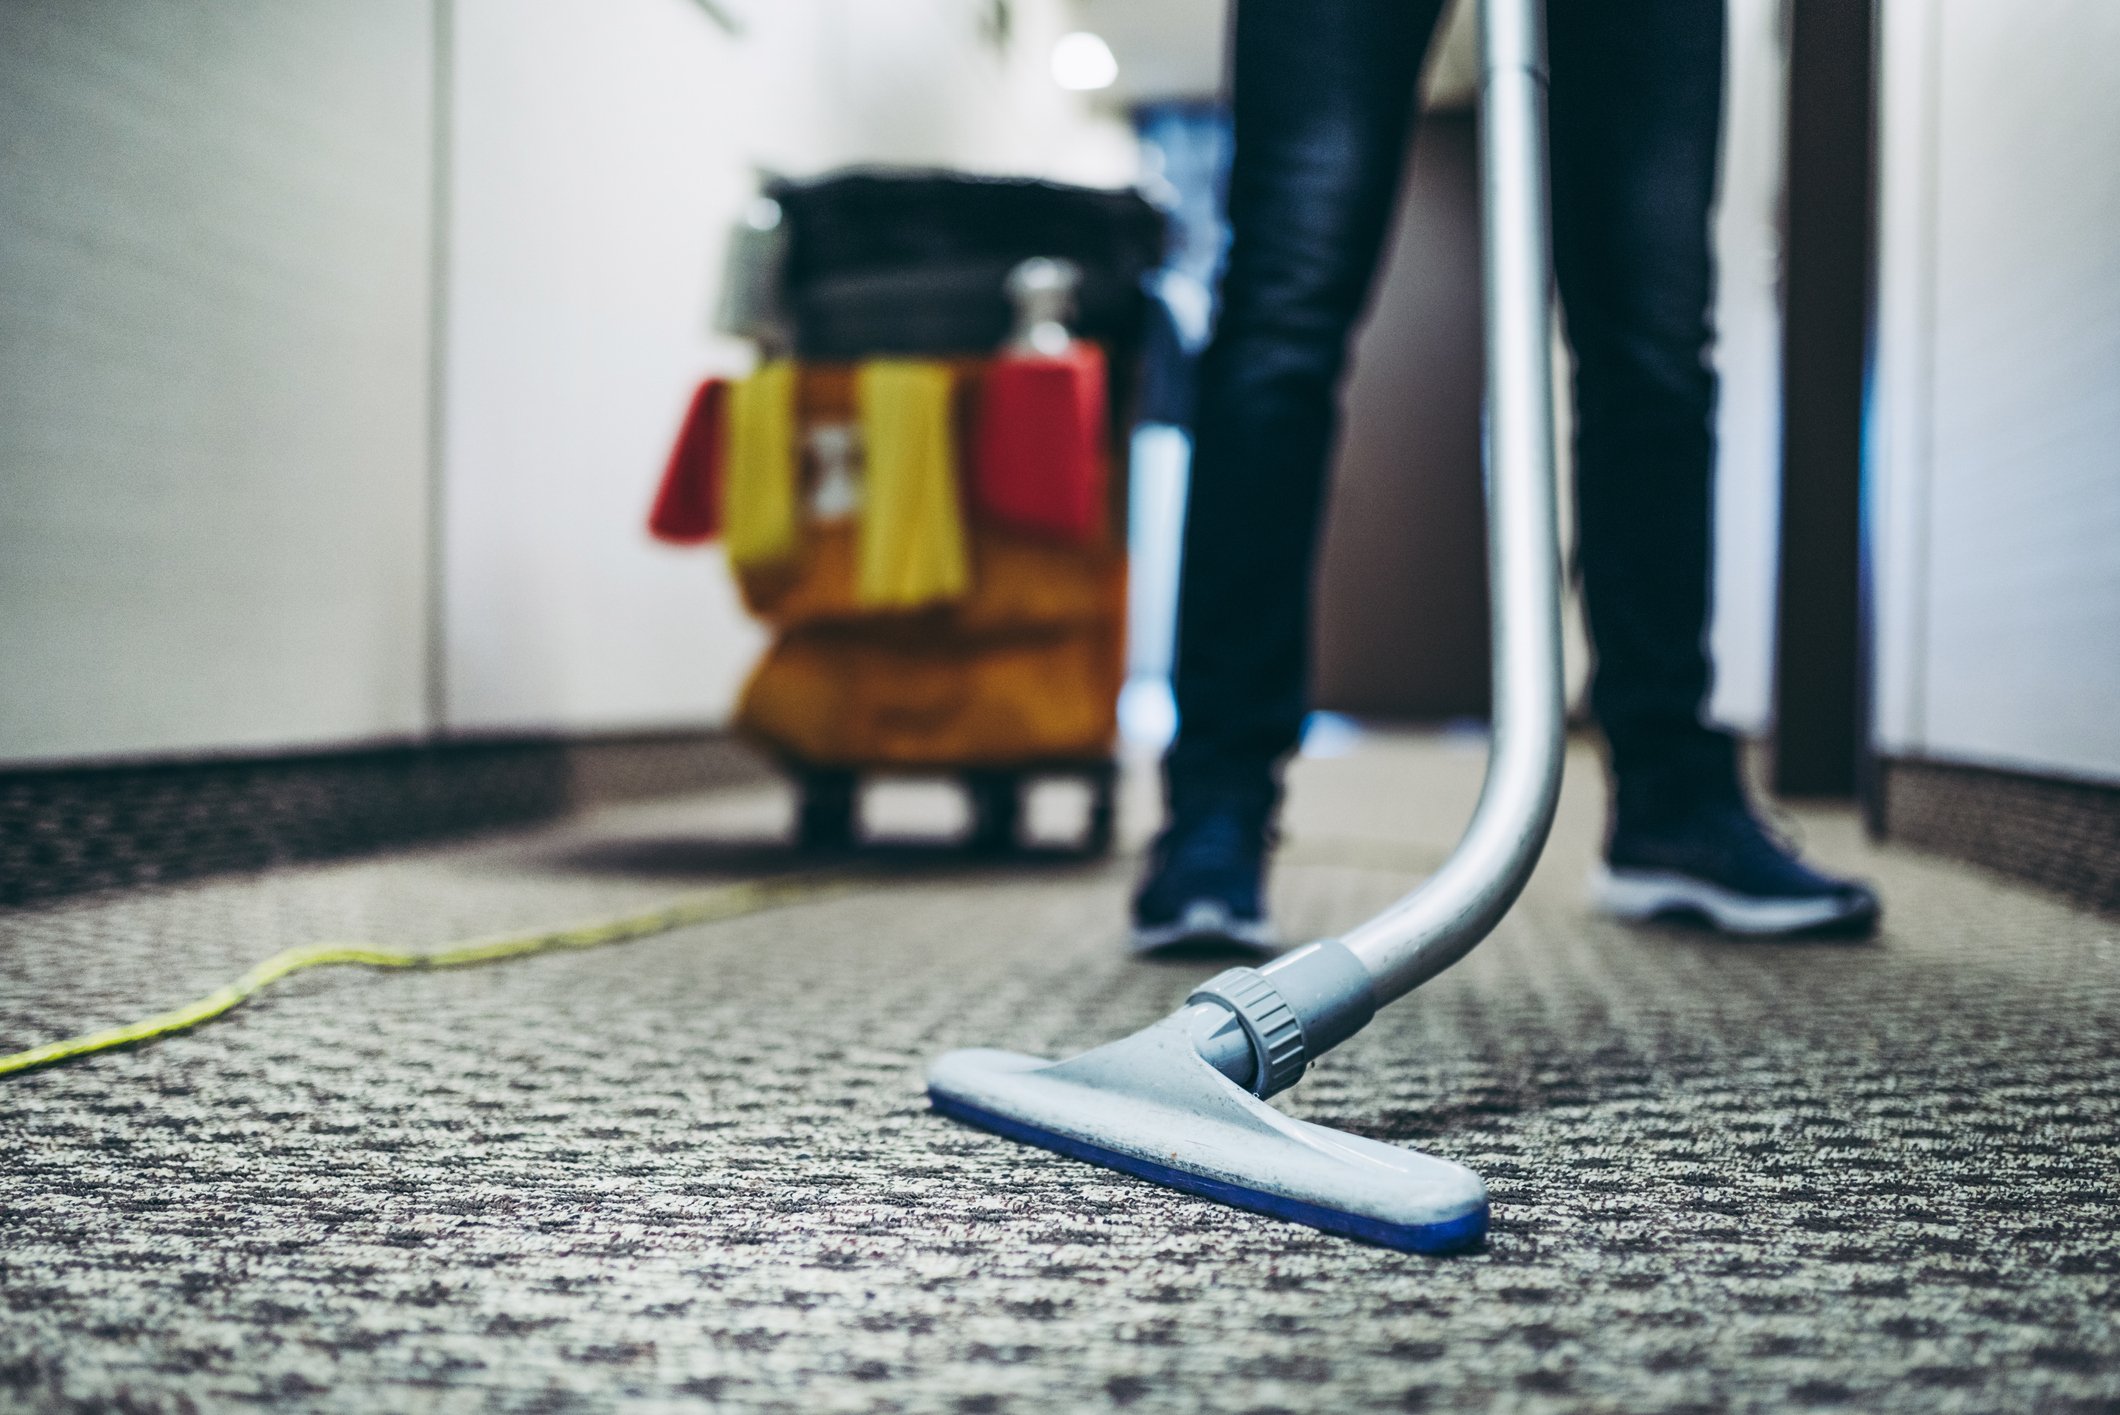 Commercial Cleaning - City Group Solutions, LLC.